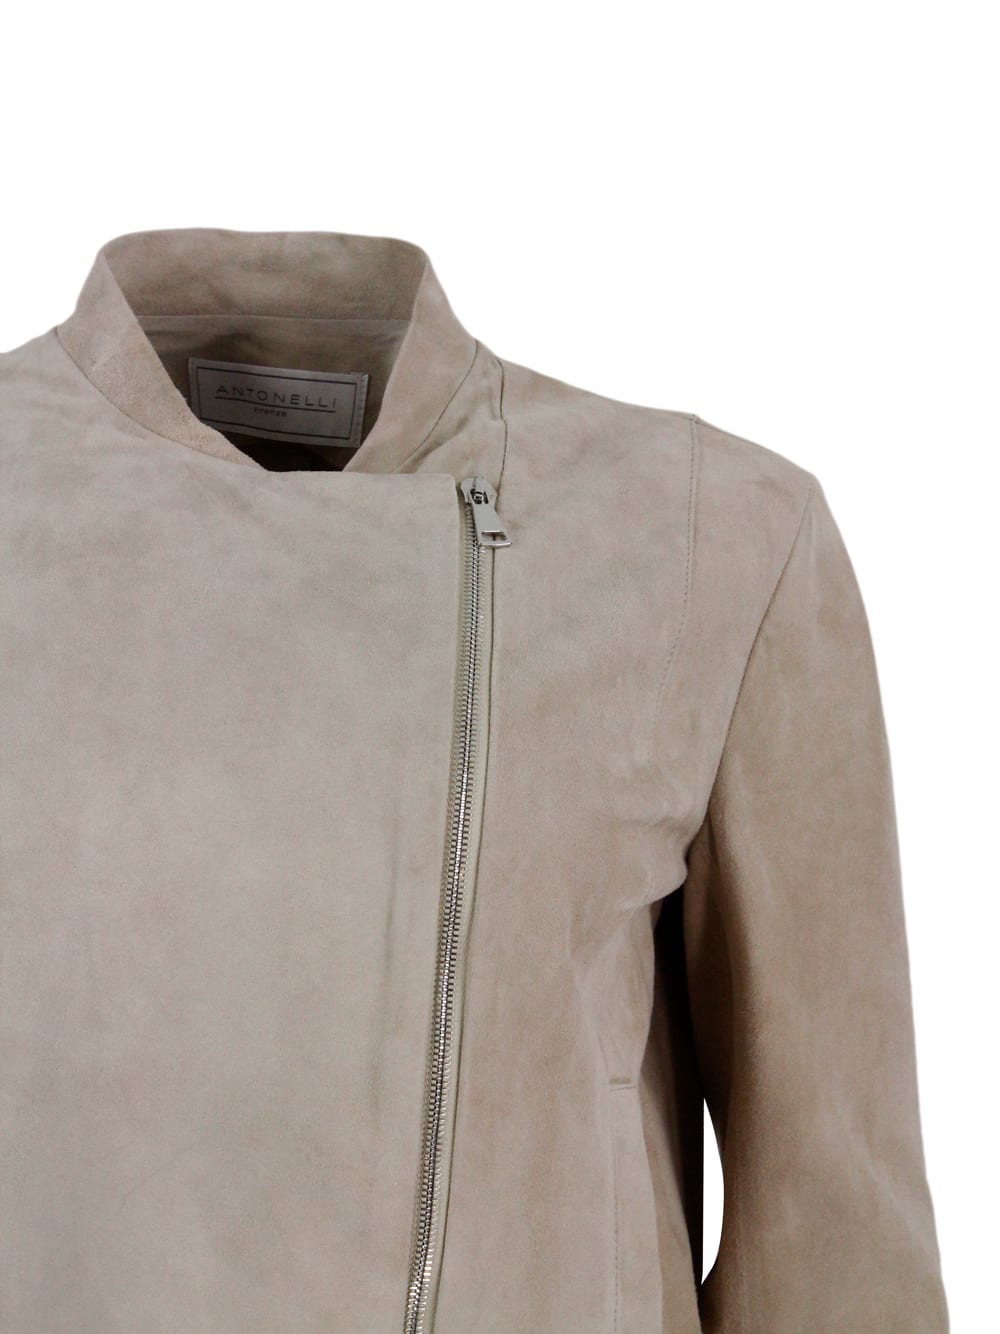 Shop Antonelli Biker Jacket Made Of Soft Suede. Side Zip Closure And Pockets On The Front In Beige